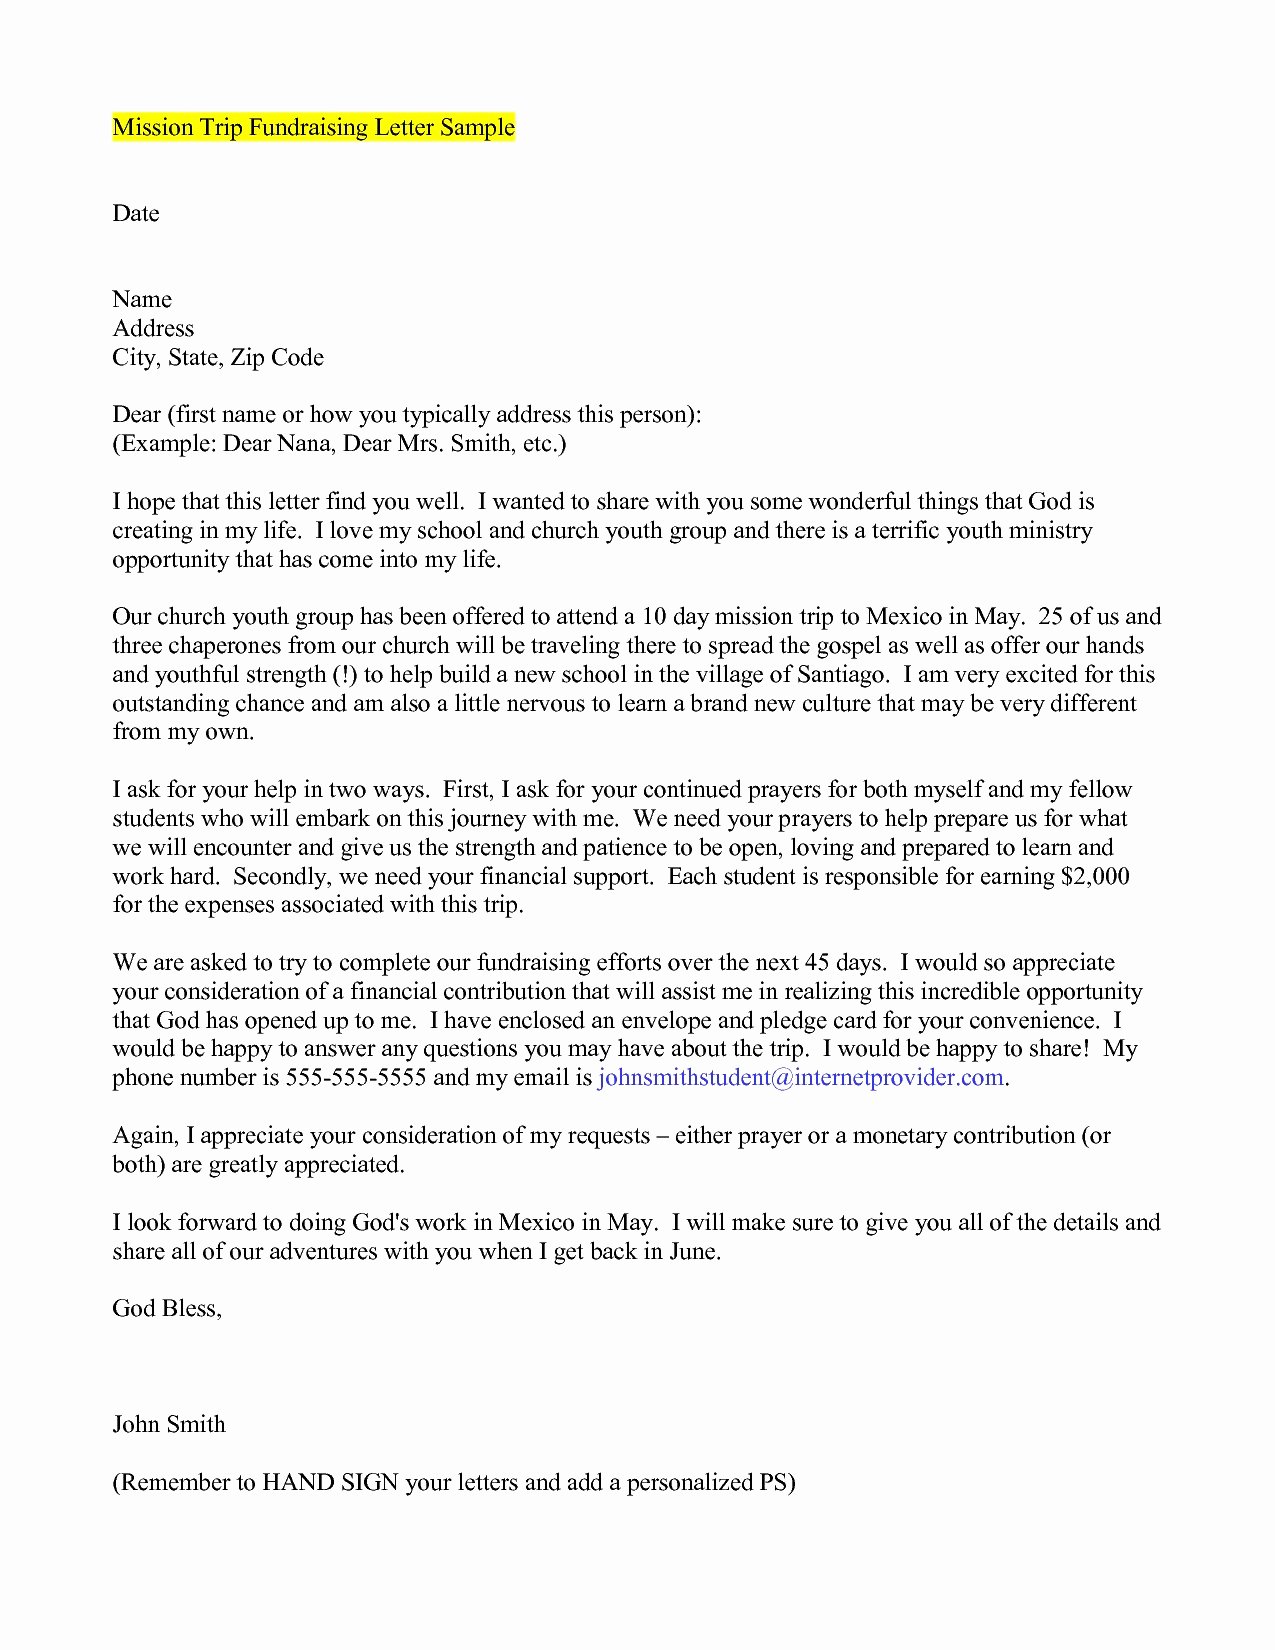 Fundraising Letters for Mission Trips Inspirational Mission Fundraising Letter Template Download